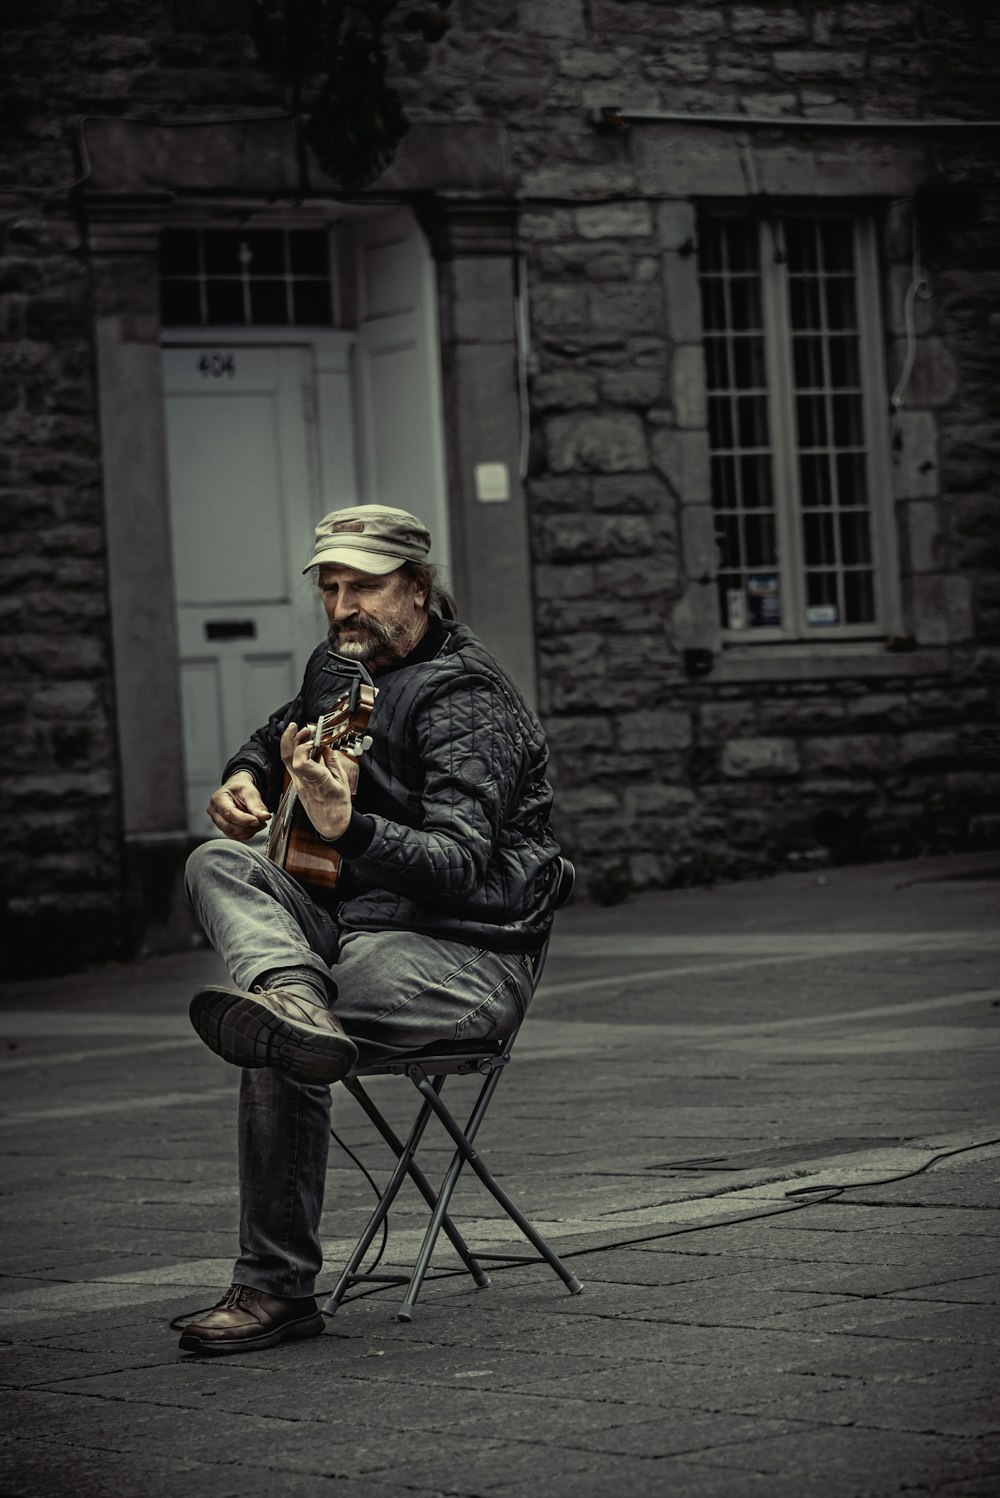 a man sitting in a chair playing a guitar